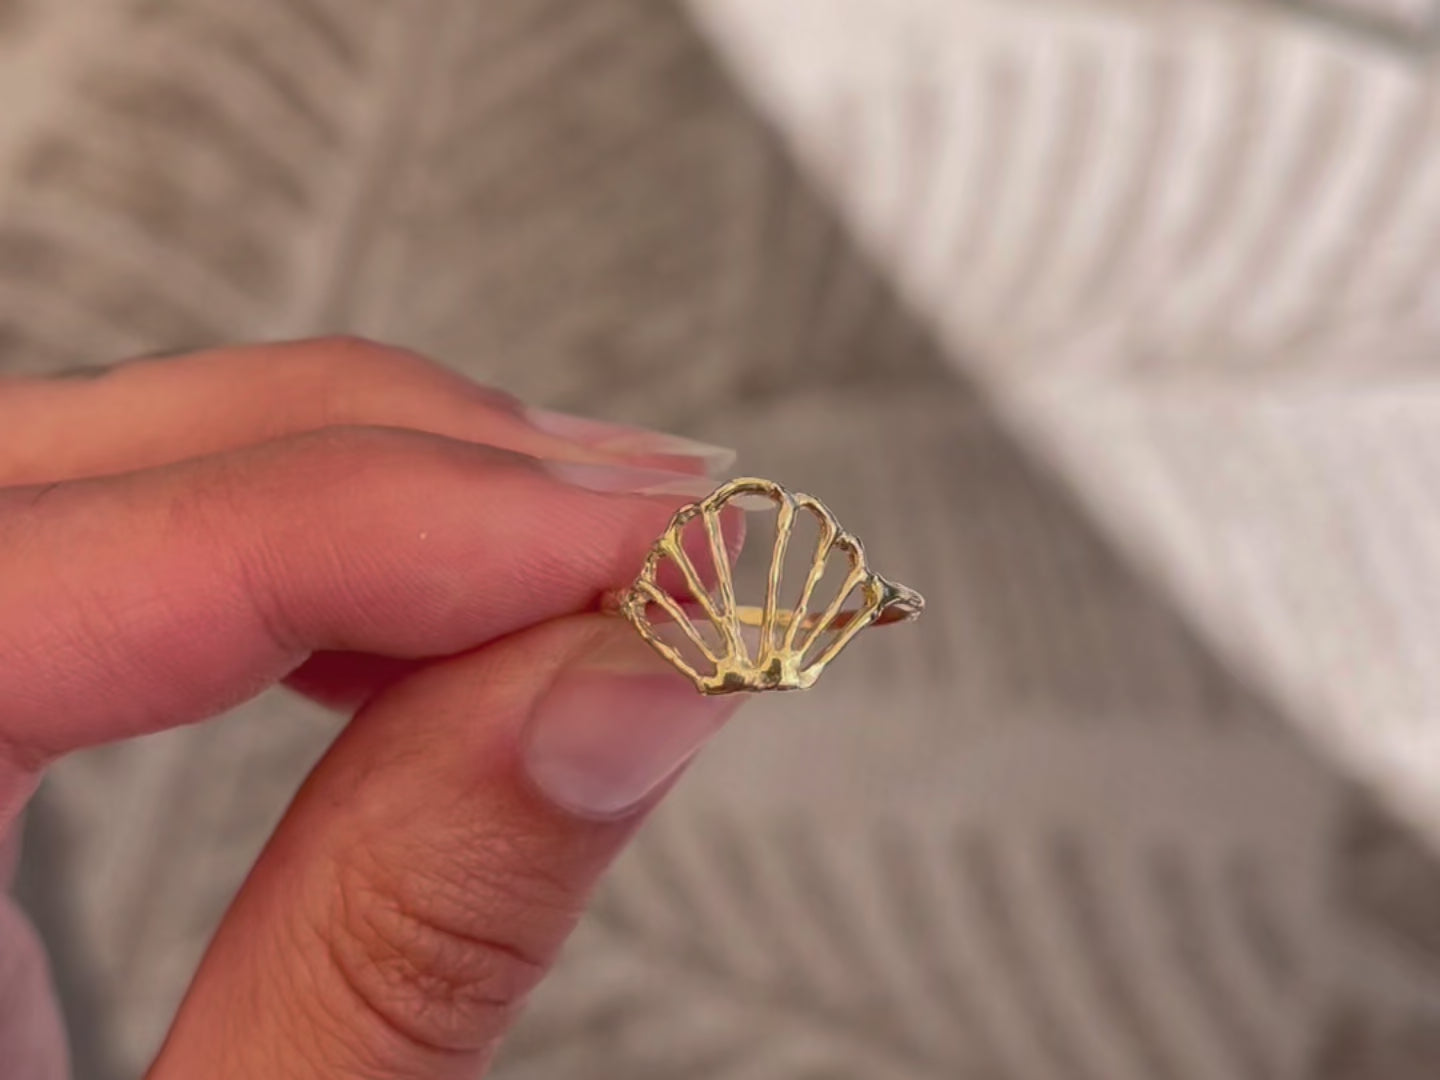 A video close-up of an exquisite seashell ring, showcasing intricate details and a natural, shell centerpiece, capturing the essence of coastal beauty and ocean-inspired jewelry design.